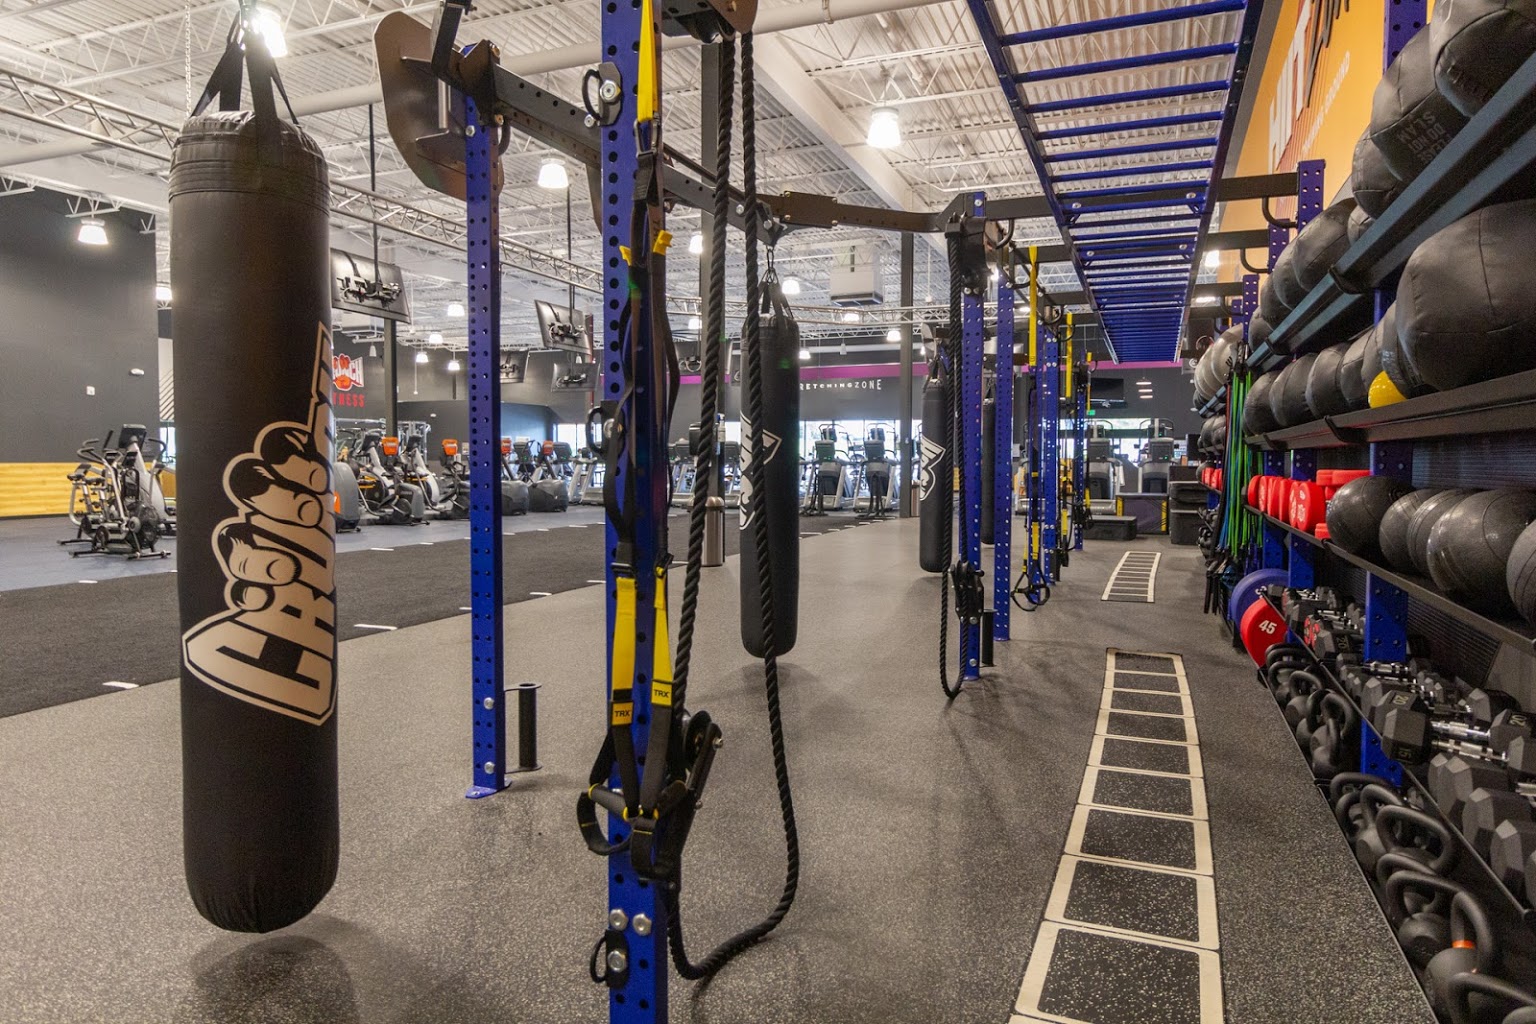 Crunch Fitness Gym In Timonium Md Google Business View Interactive Tour Merchant View 360